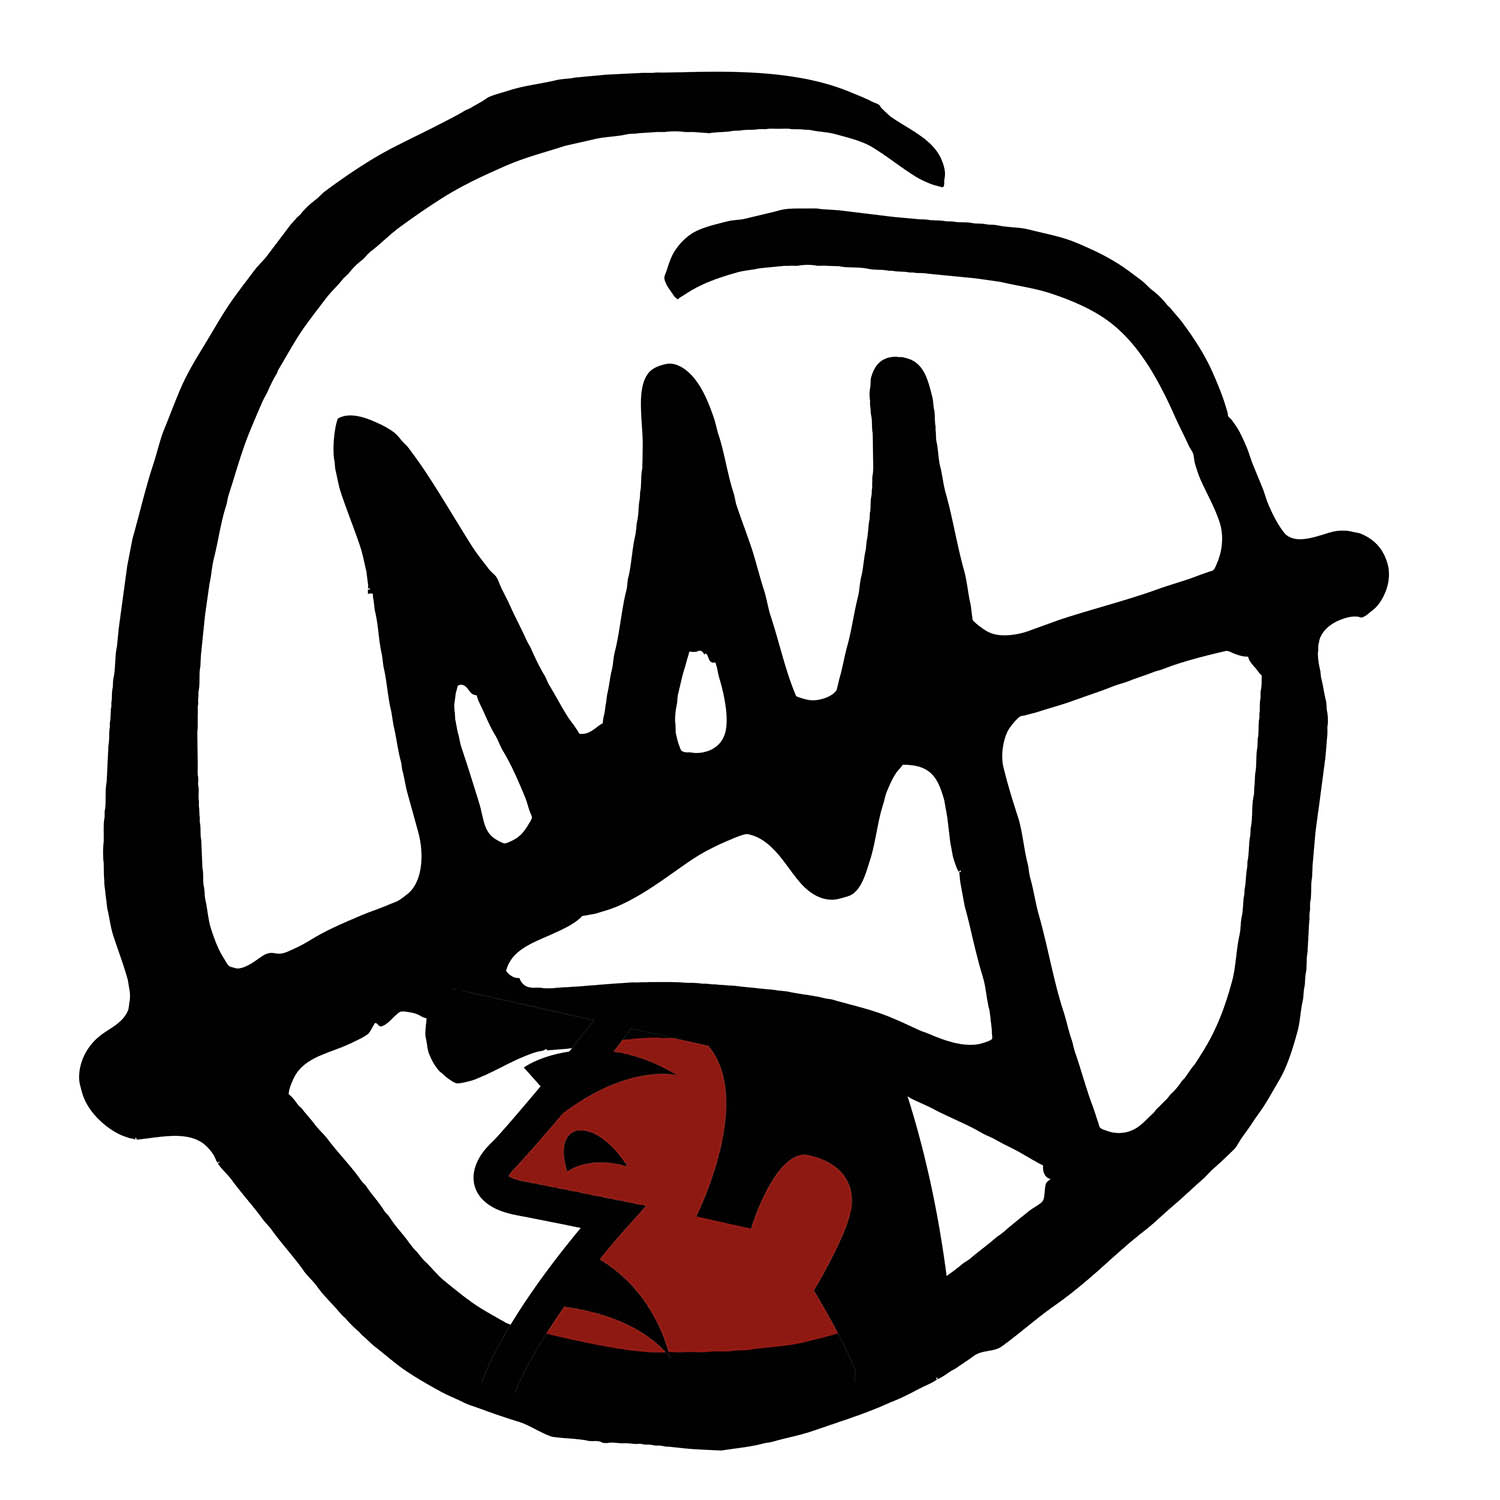 The logo for Surly's Doomtree brew, based on the brewery's logo and the rap crew's "No Kings" album art.